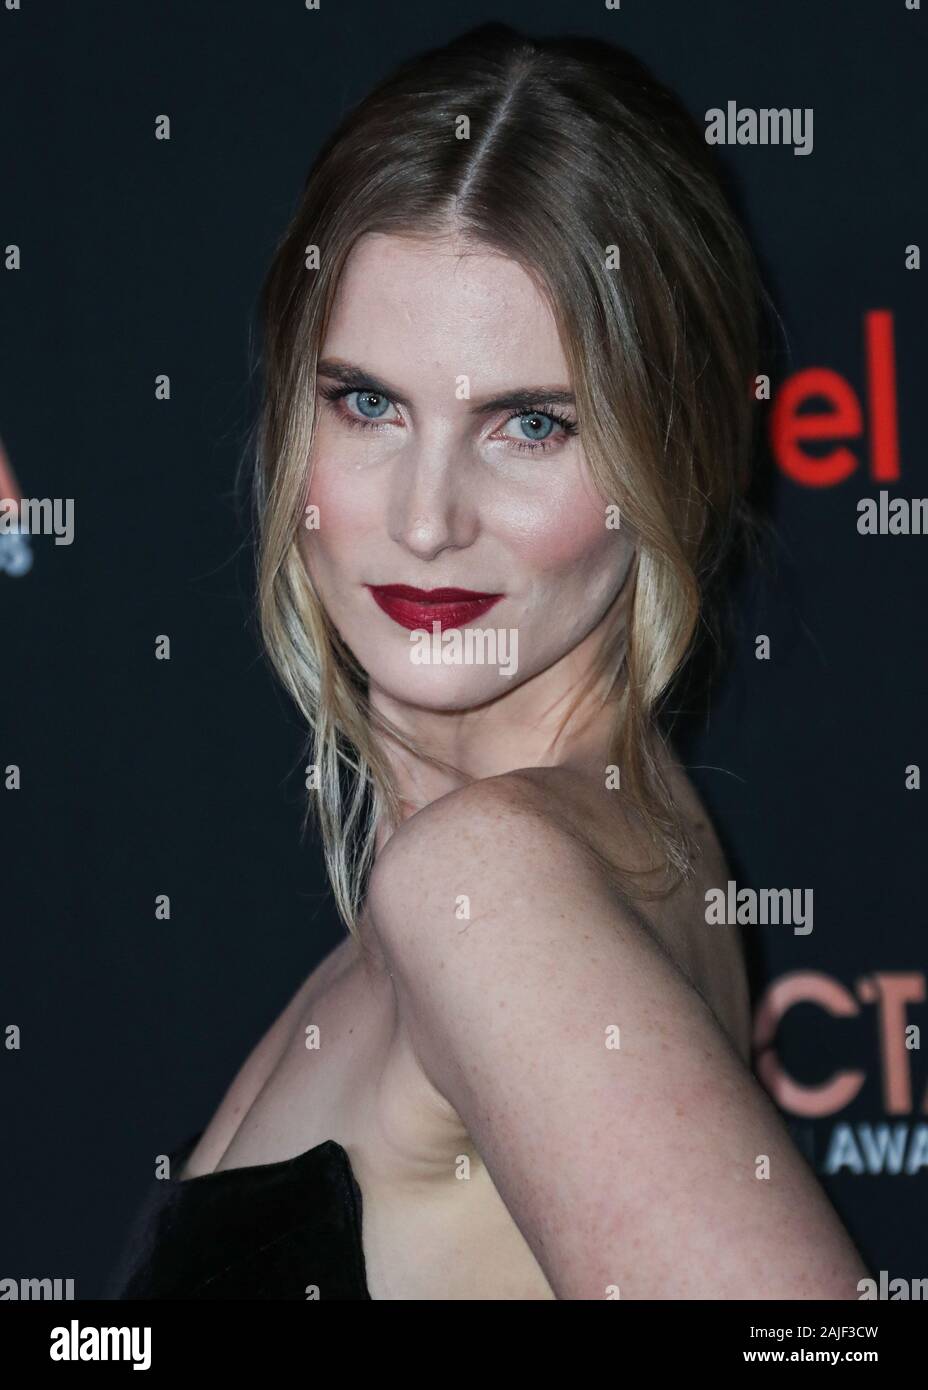 West Hollywood, United States. 03rd Jan, 2020. WEST HOLLYWOOD, LOS ANGELES, CALIFORNIA, USA - JANUARY 03: Emm Wiseman arrives at the 9th Annual Australian Academy Of Cinema And Television Arts (AACTA) International Awards held at SkyBar at the Mondrian Los Angeles on January 3, 2020 in West Hollywood, Los Angeles, California, United States. (Photo by Xavier Collin/Image Press Agency) Credit: Image Press Agency/Alamy Live News Stock Photo